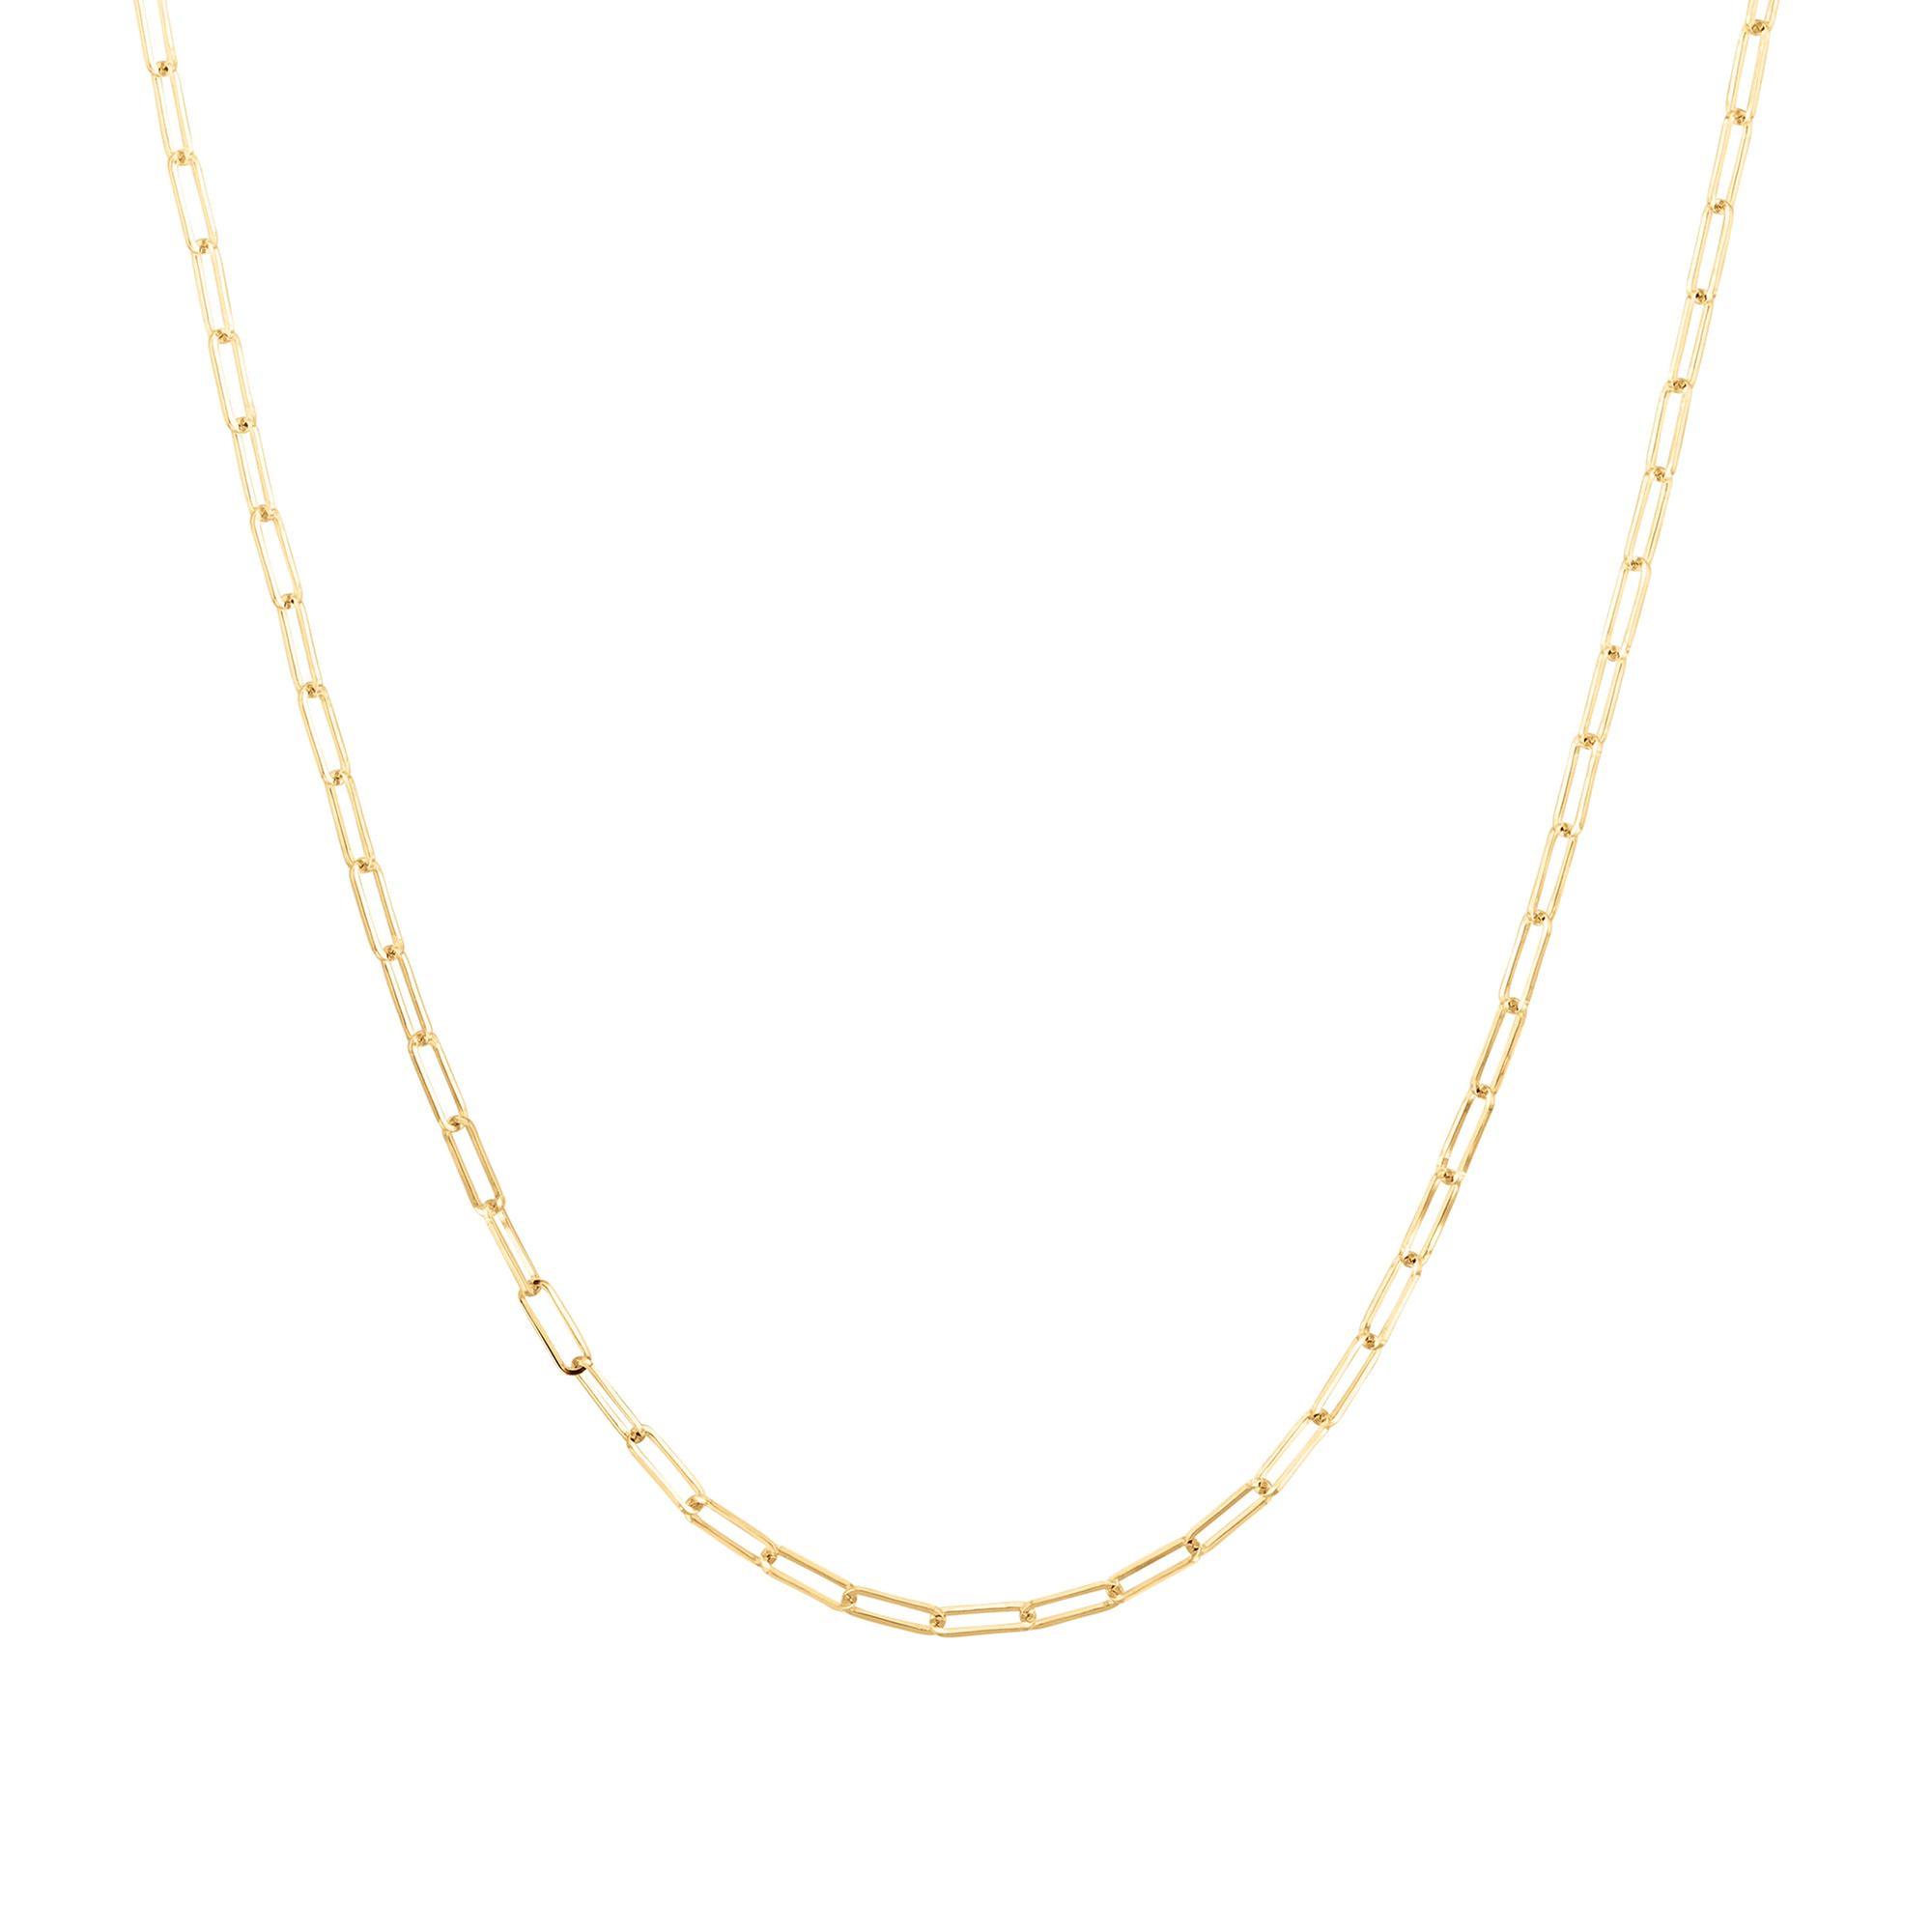 Details about   Real 14kt White Gold 1.1mm Singapore Chain; 14 inch 